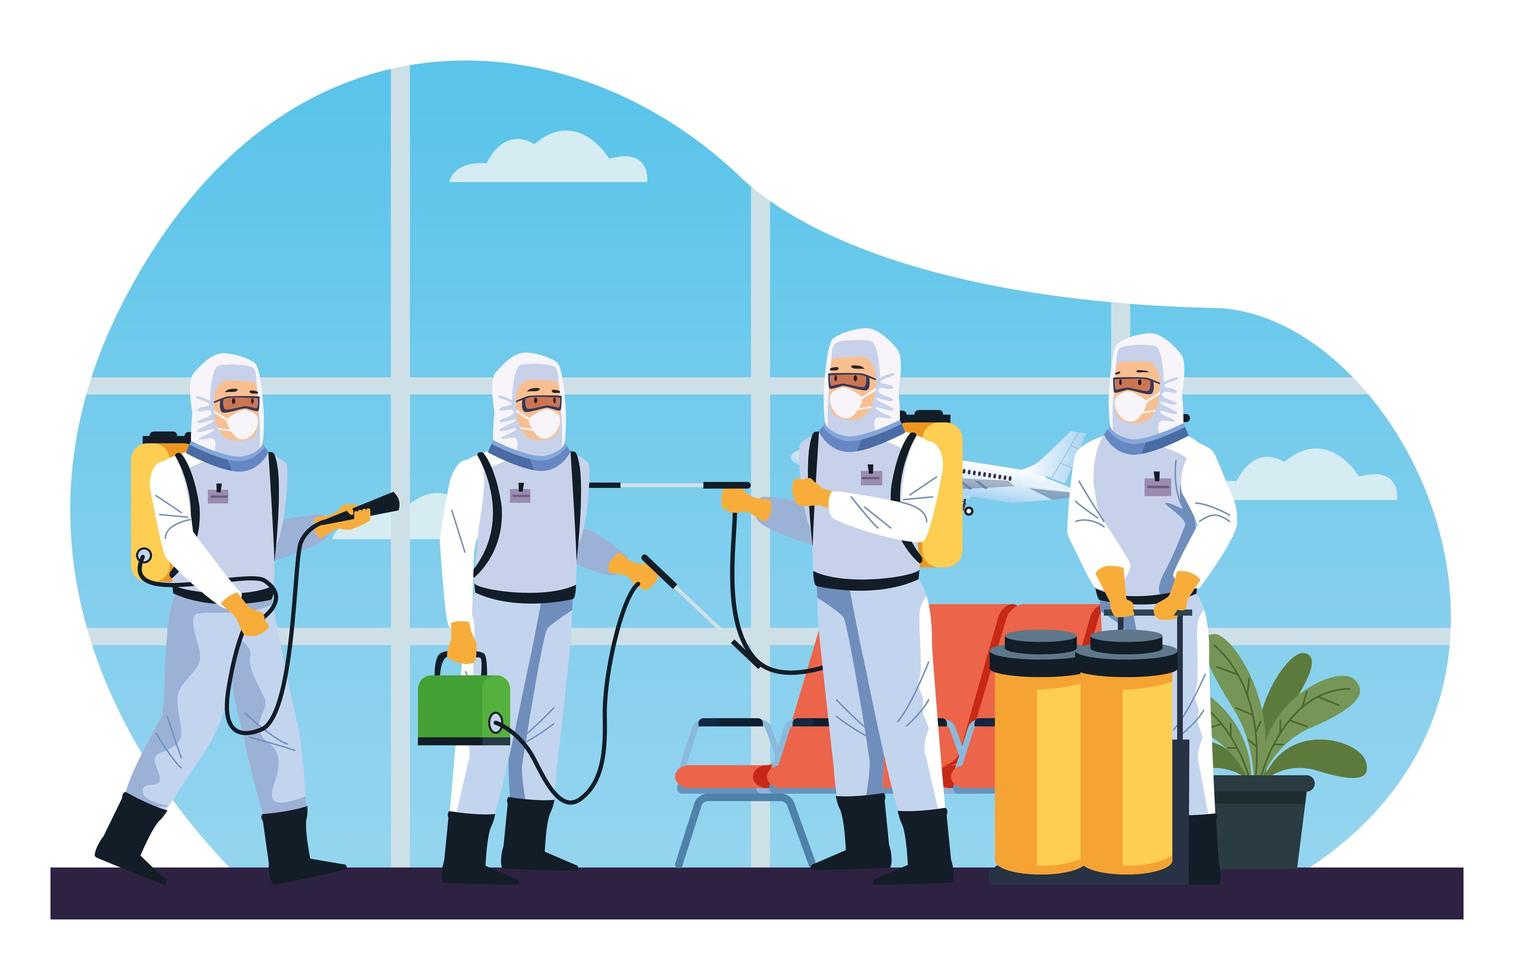 Biosafety workers disinfect airport for covid19 vector